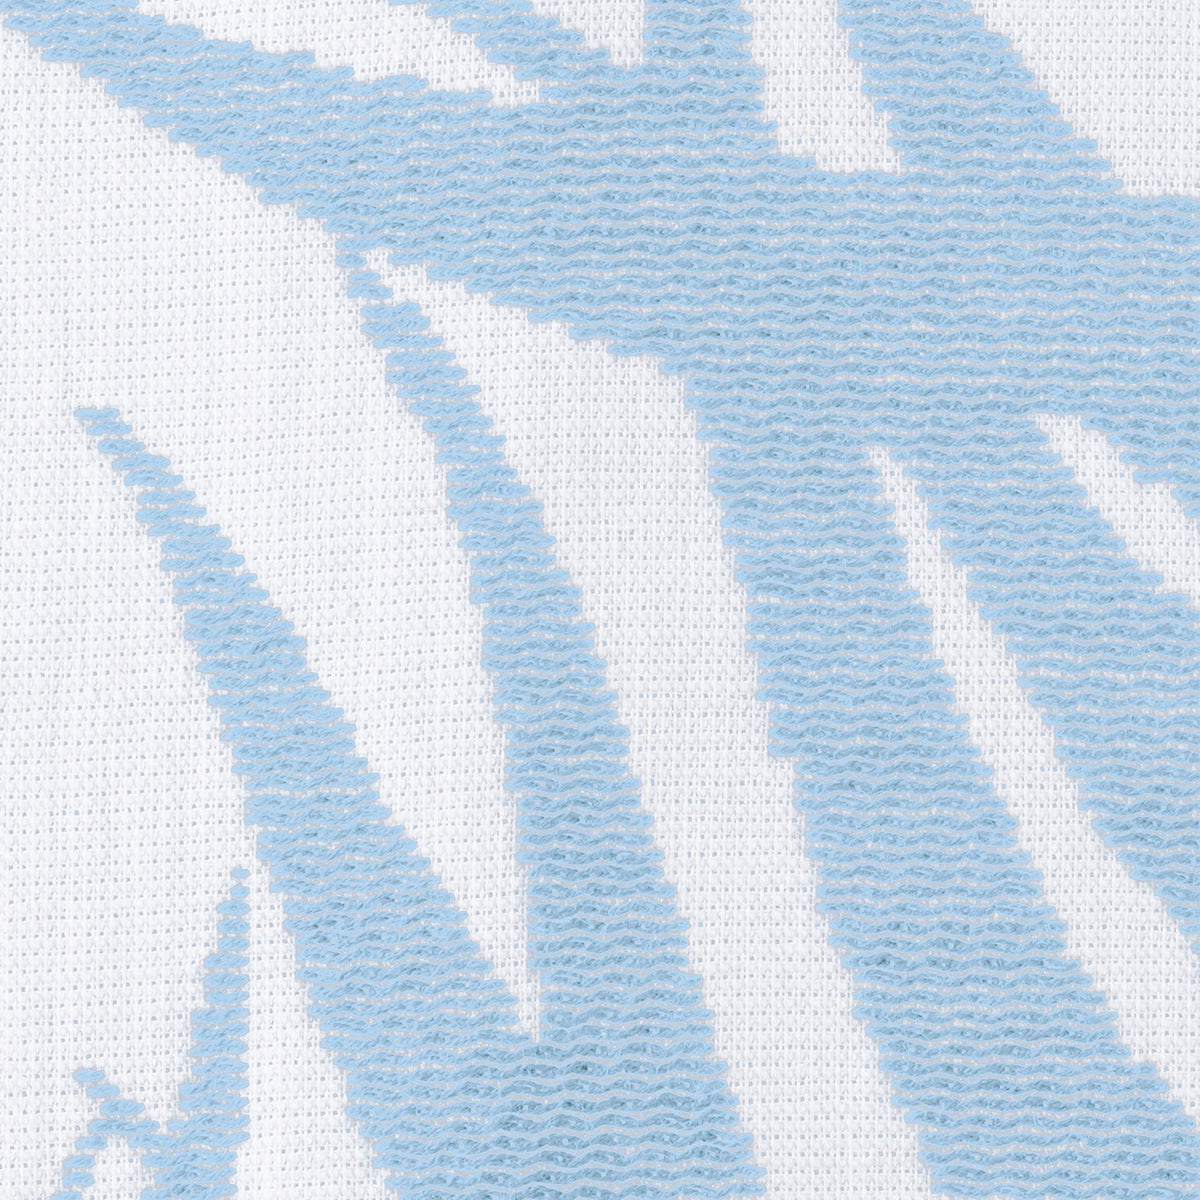 Swatch Sample of Matouk Zebra Palm Beach Towels in Color Pool Blue